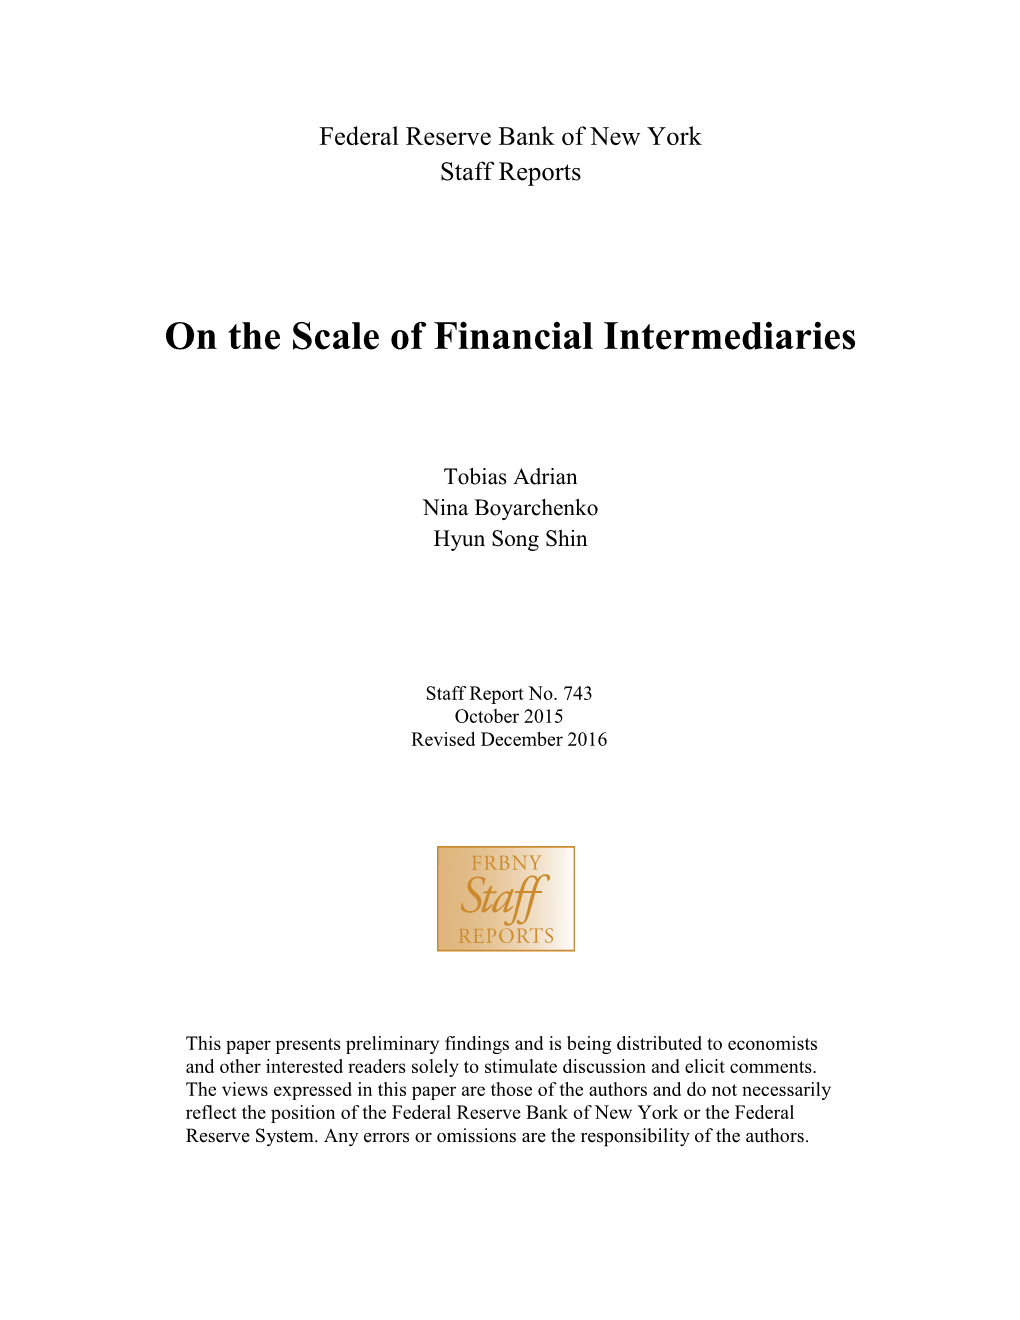 On the Scale of Financial Intermediaries